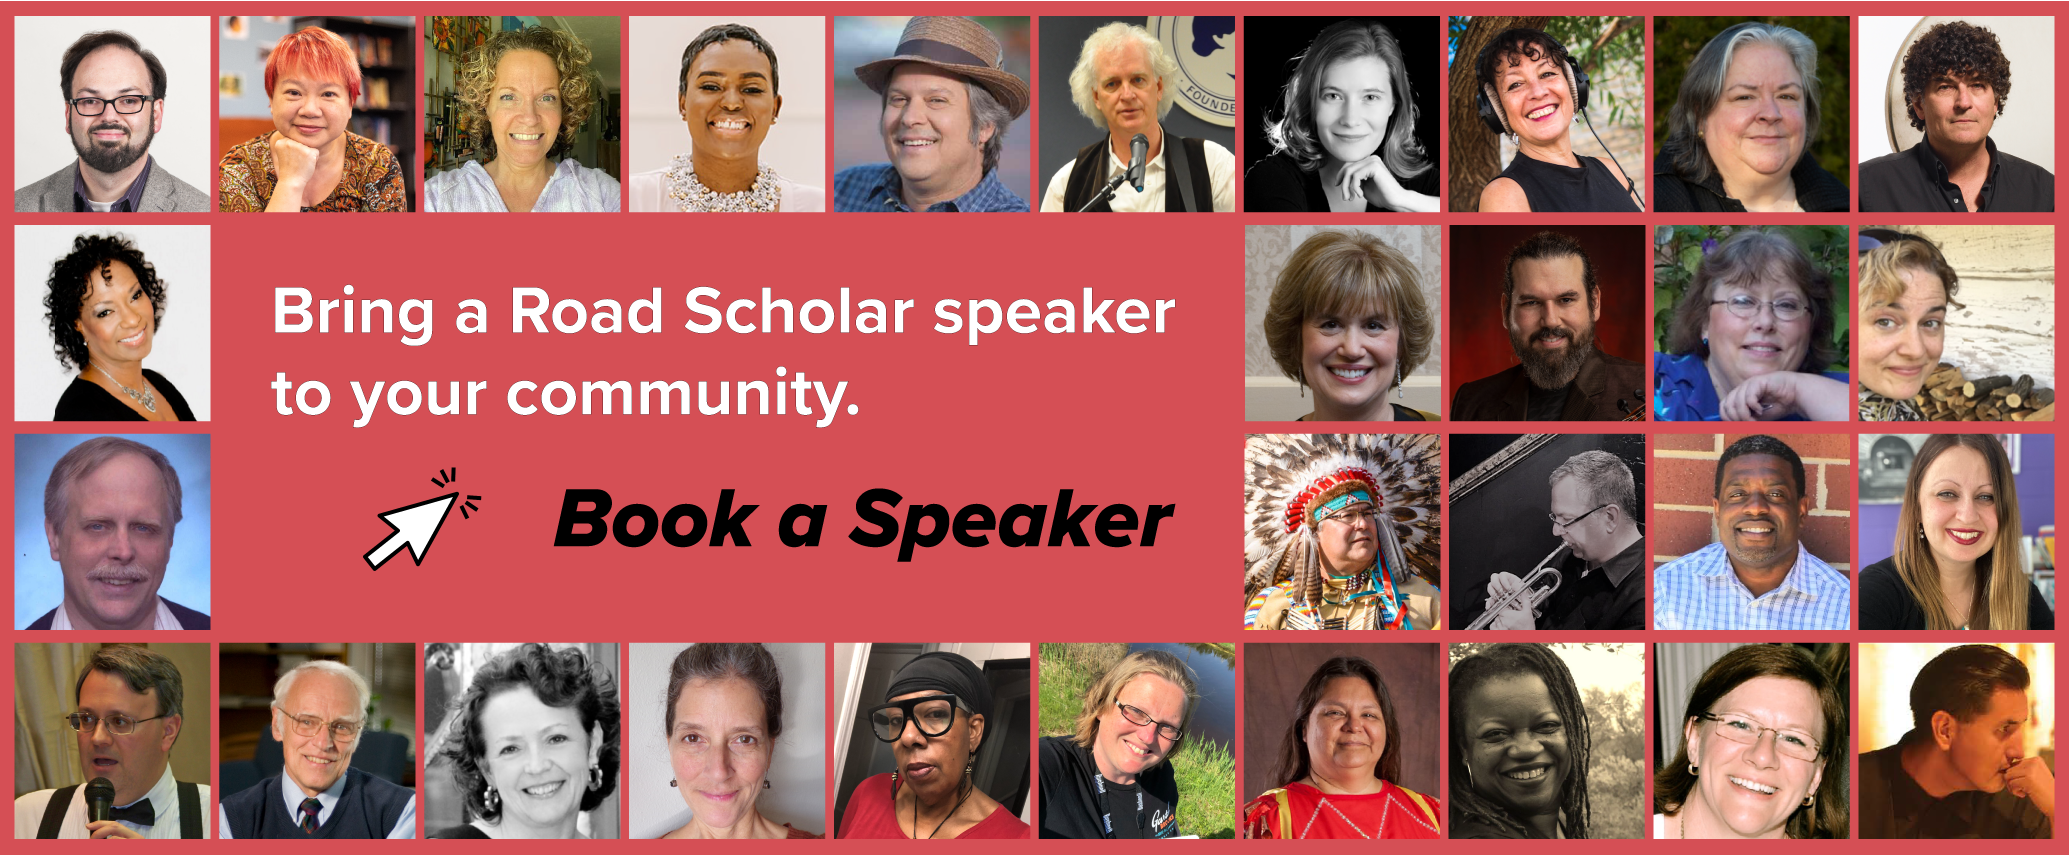 A collage of speakers' portraits aligned like tiles on a red background. Black and white text reads "bring a road scholar speaker to your community. book a speaker." A mouse icon indicates a clickable link.